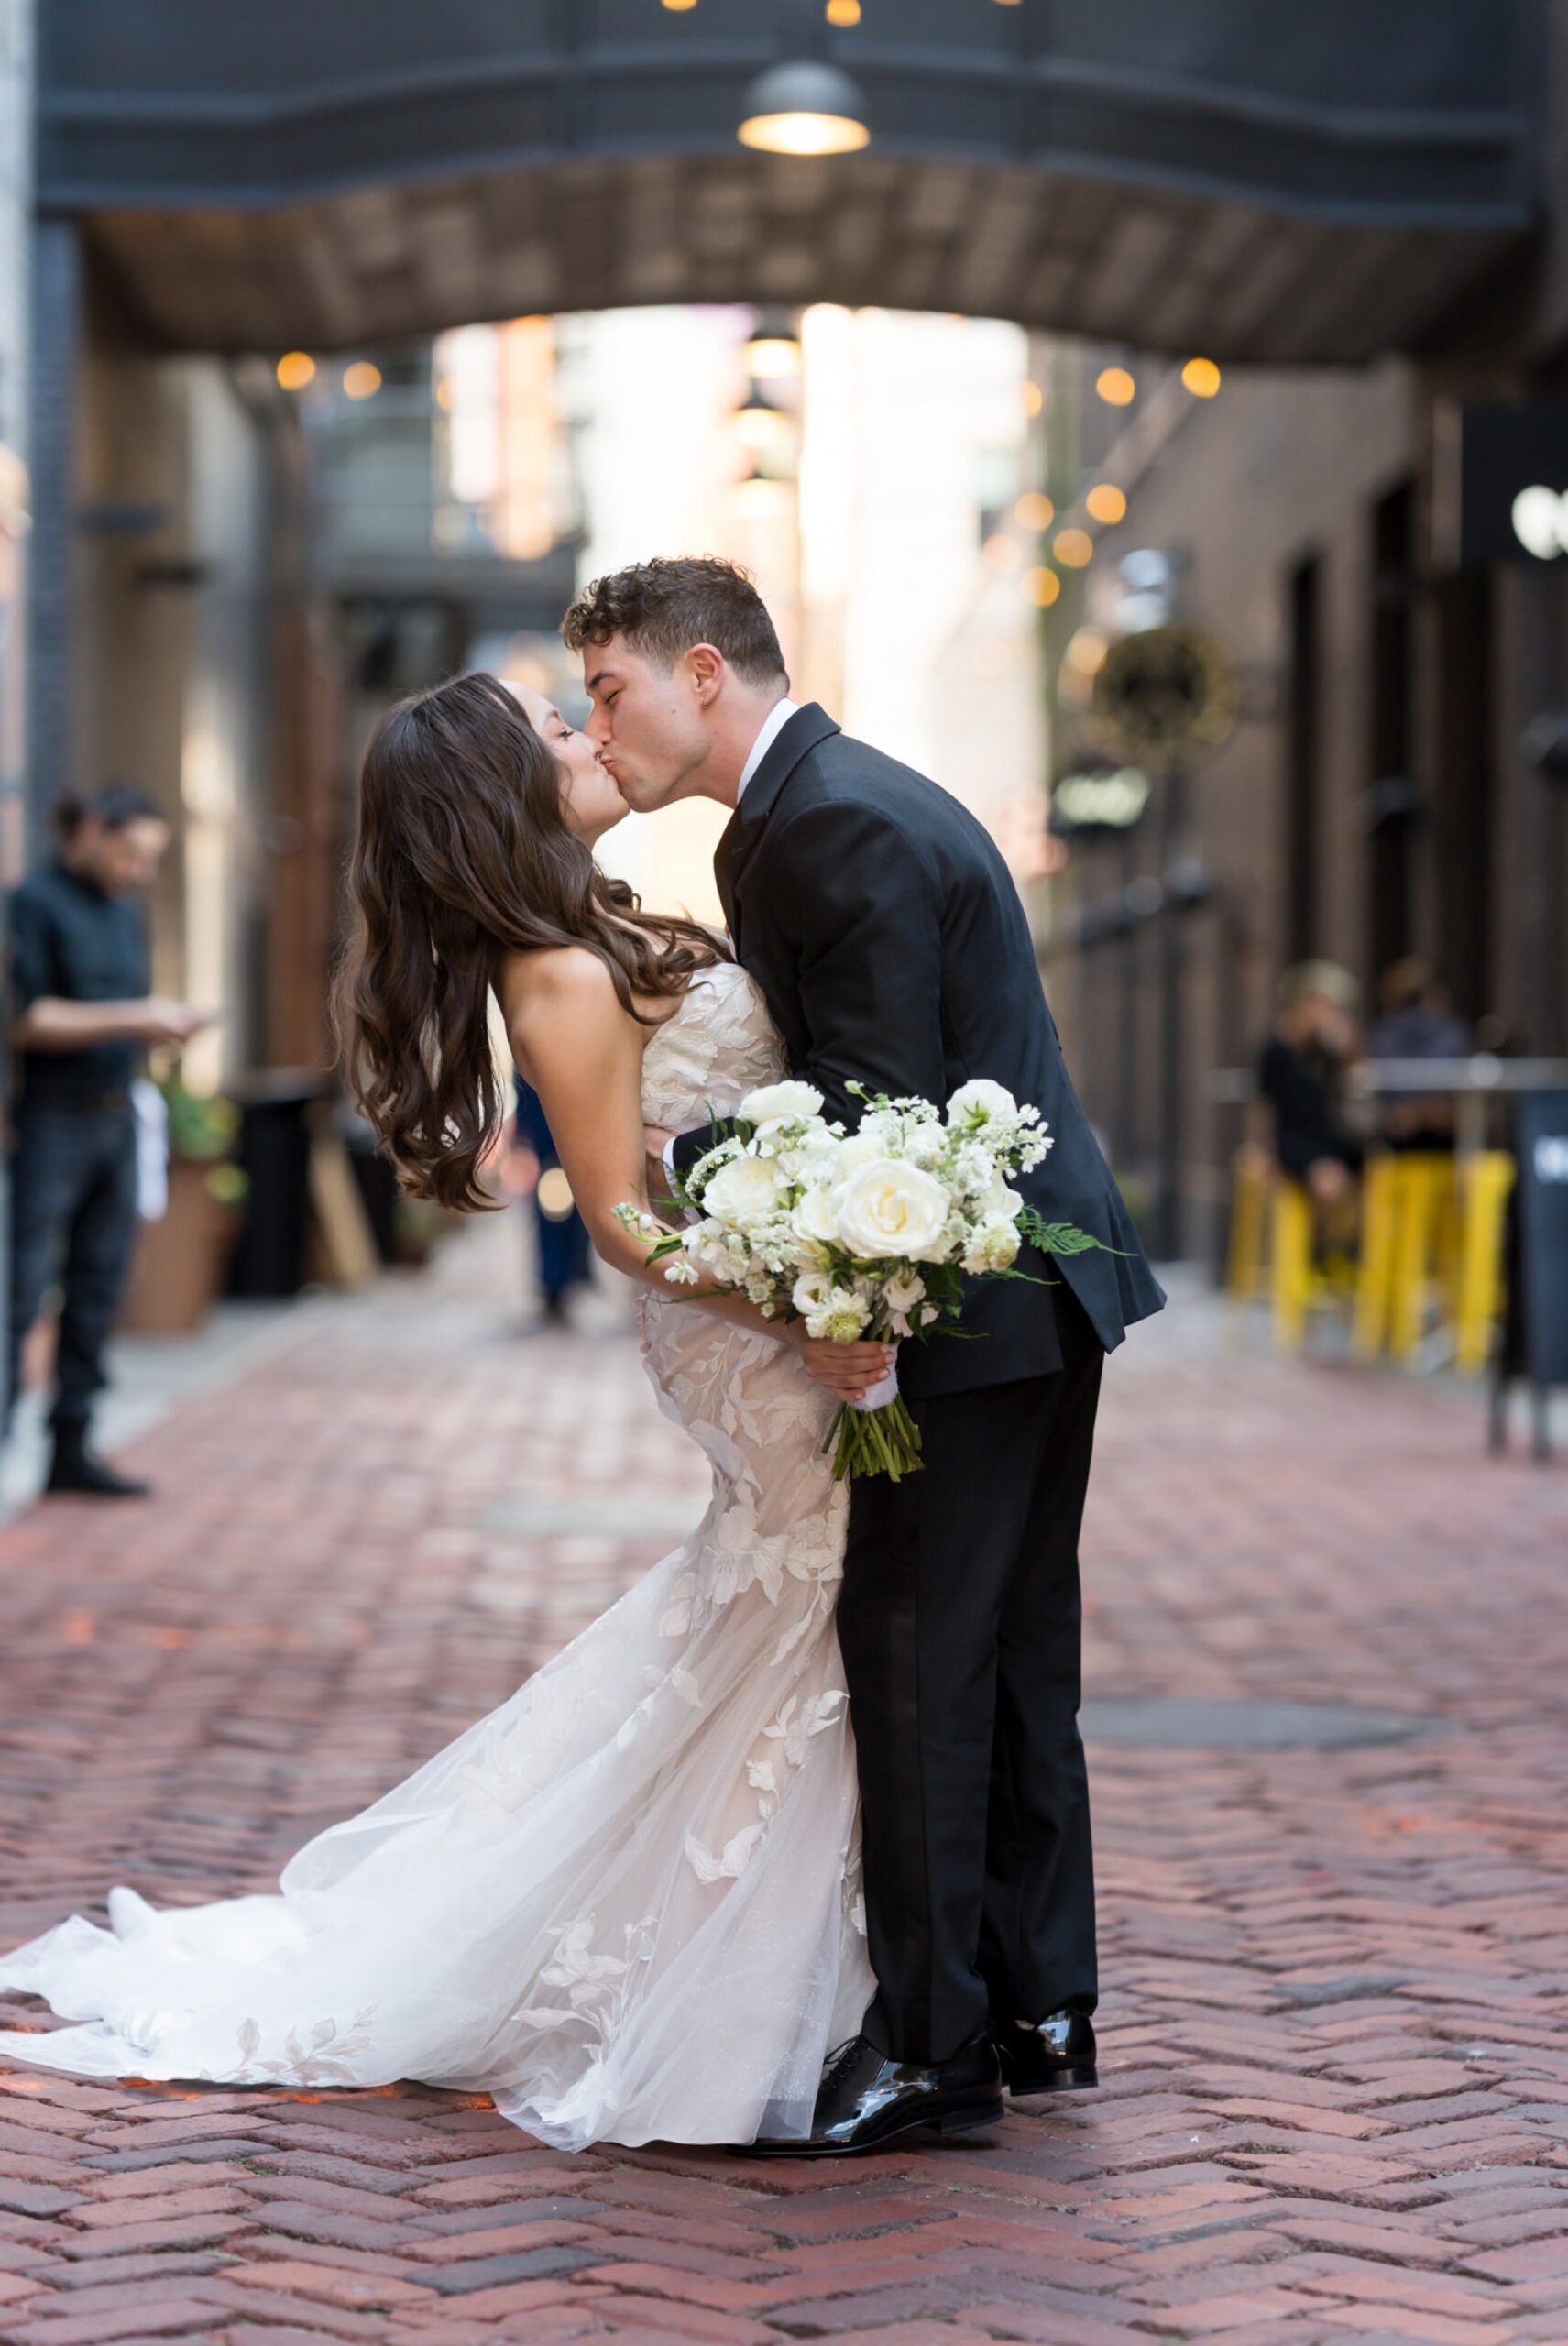 A bride and groom kiss on their wedding day in Parker's Alley.  